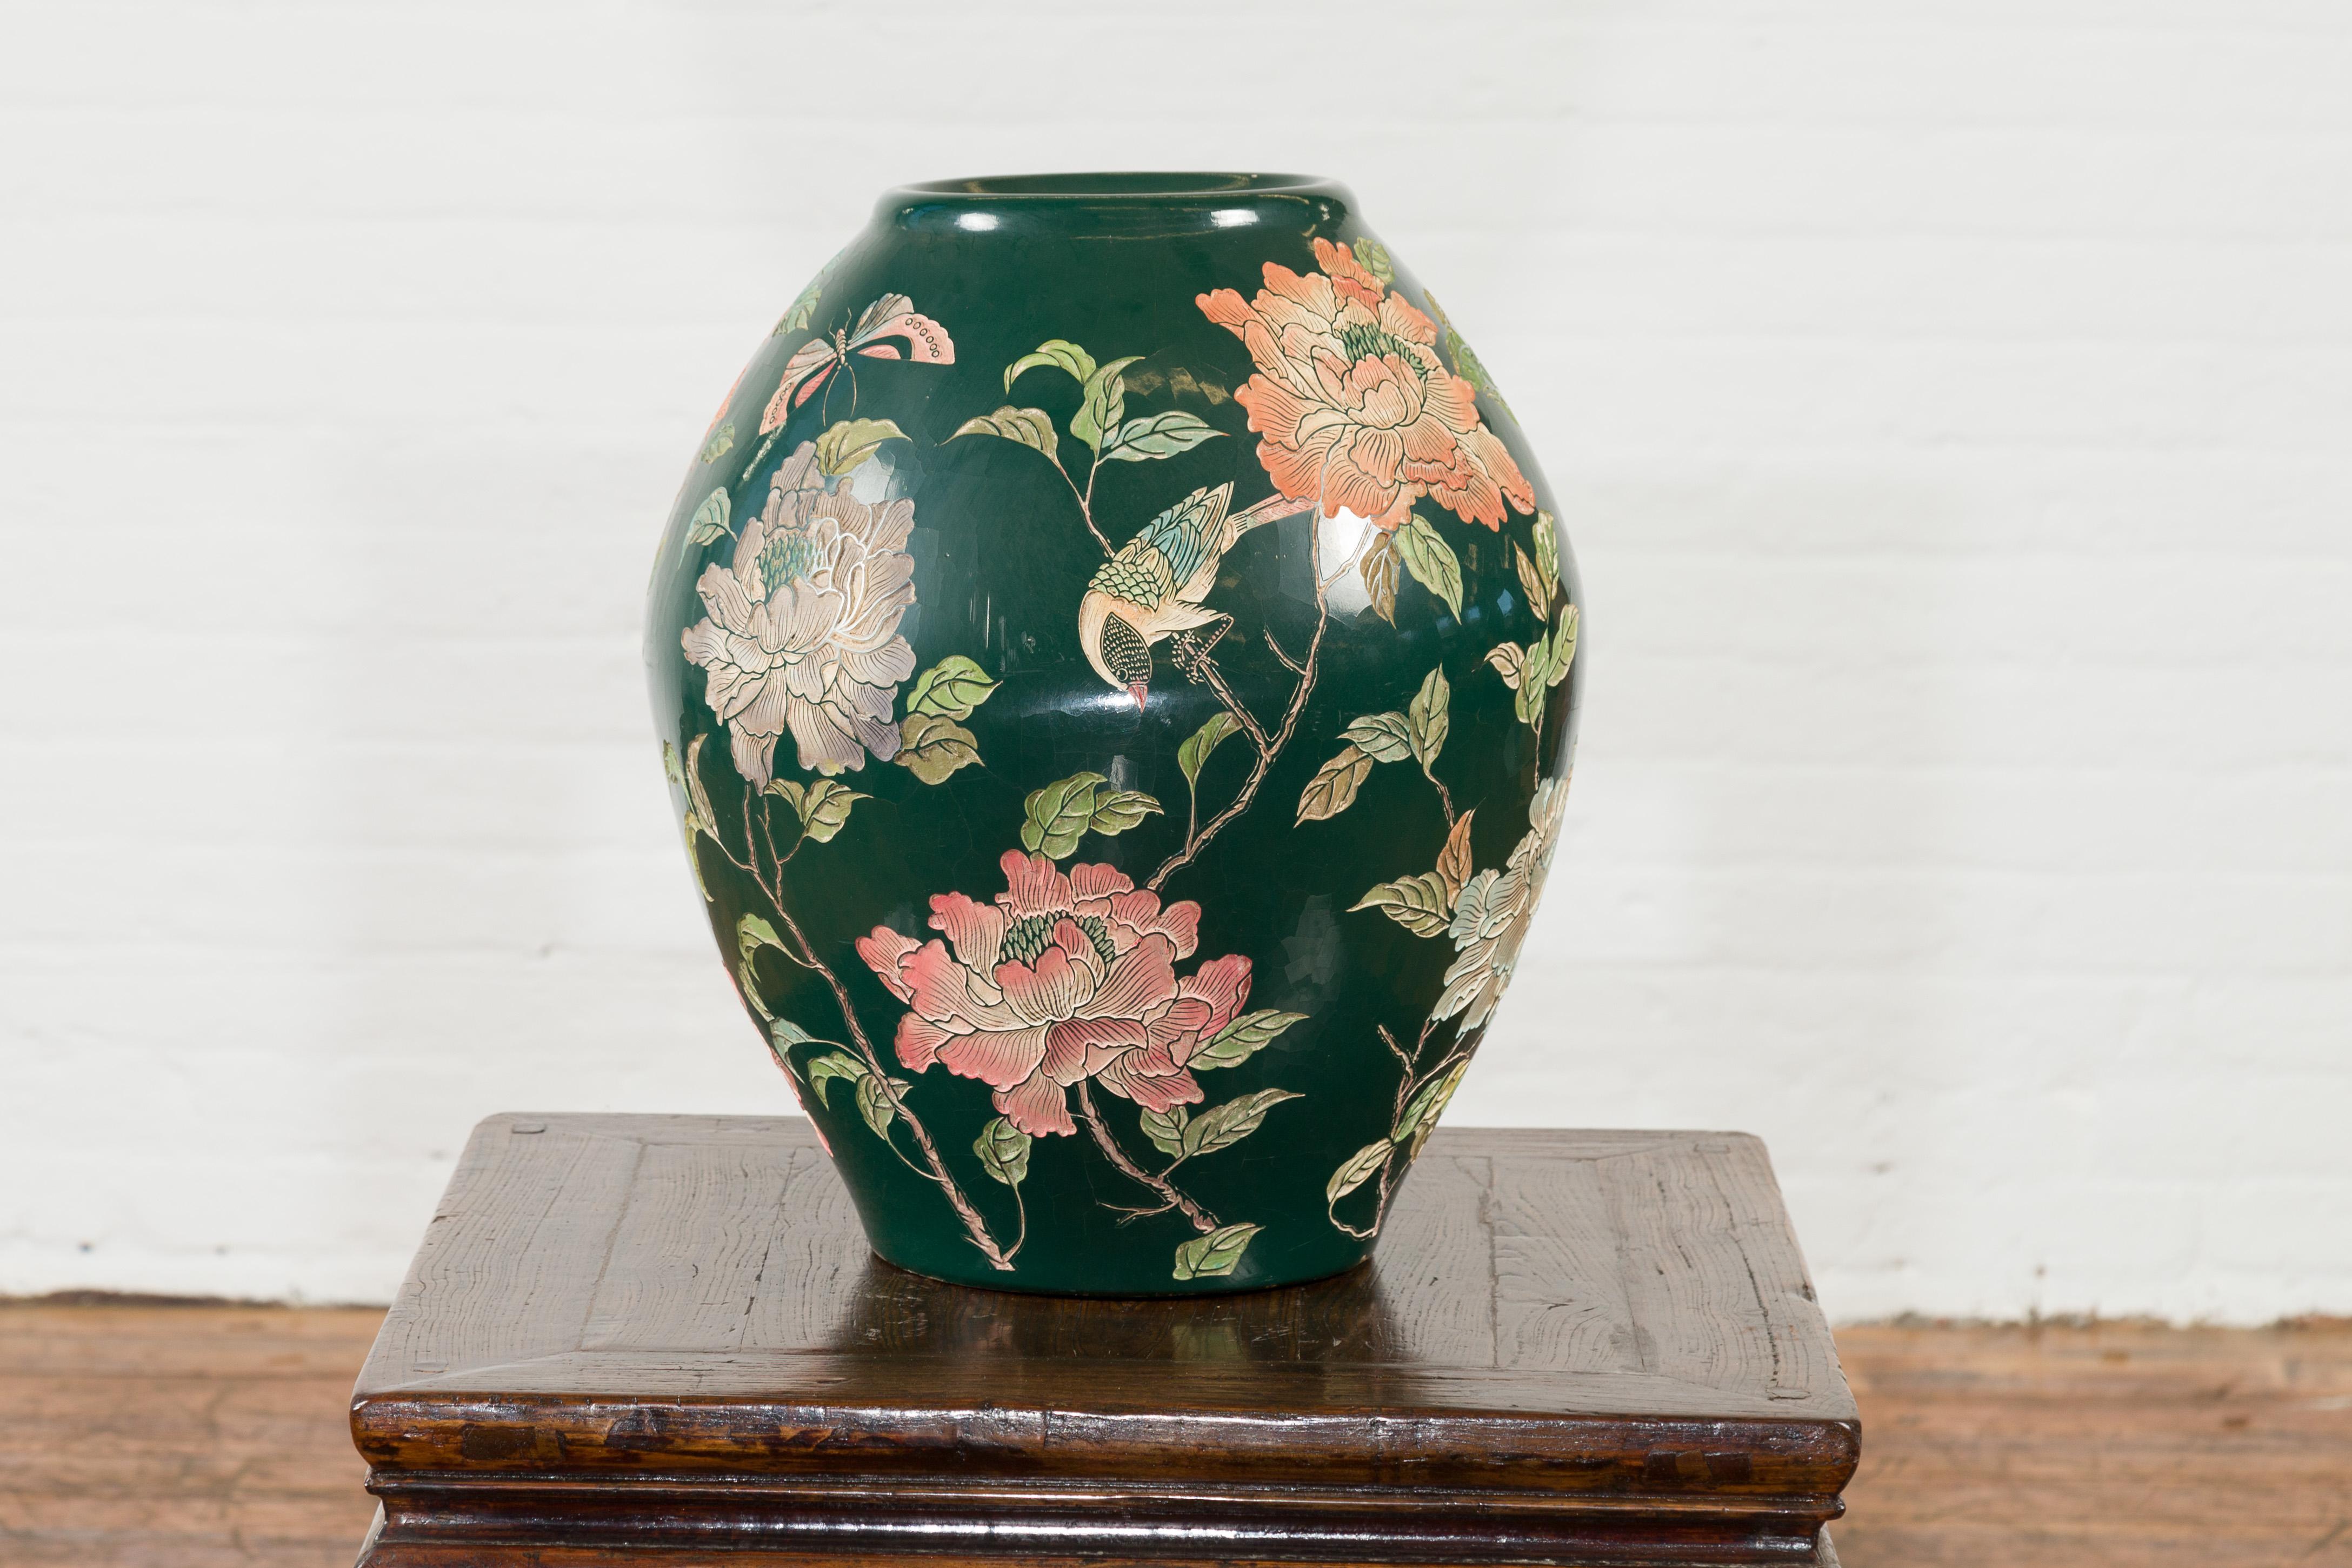 A vintage Chinese handcrafted green vase from the mid-20th century, with incised floral and bird decor. Created in China during the midcentury period, this vase features a dark green ground perfectly accented with a delicate incised decor showcasing